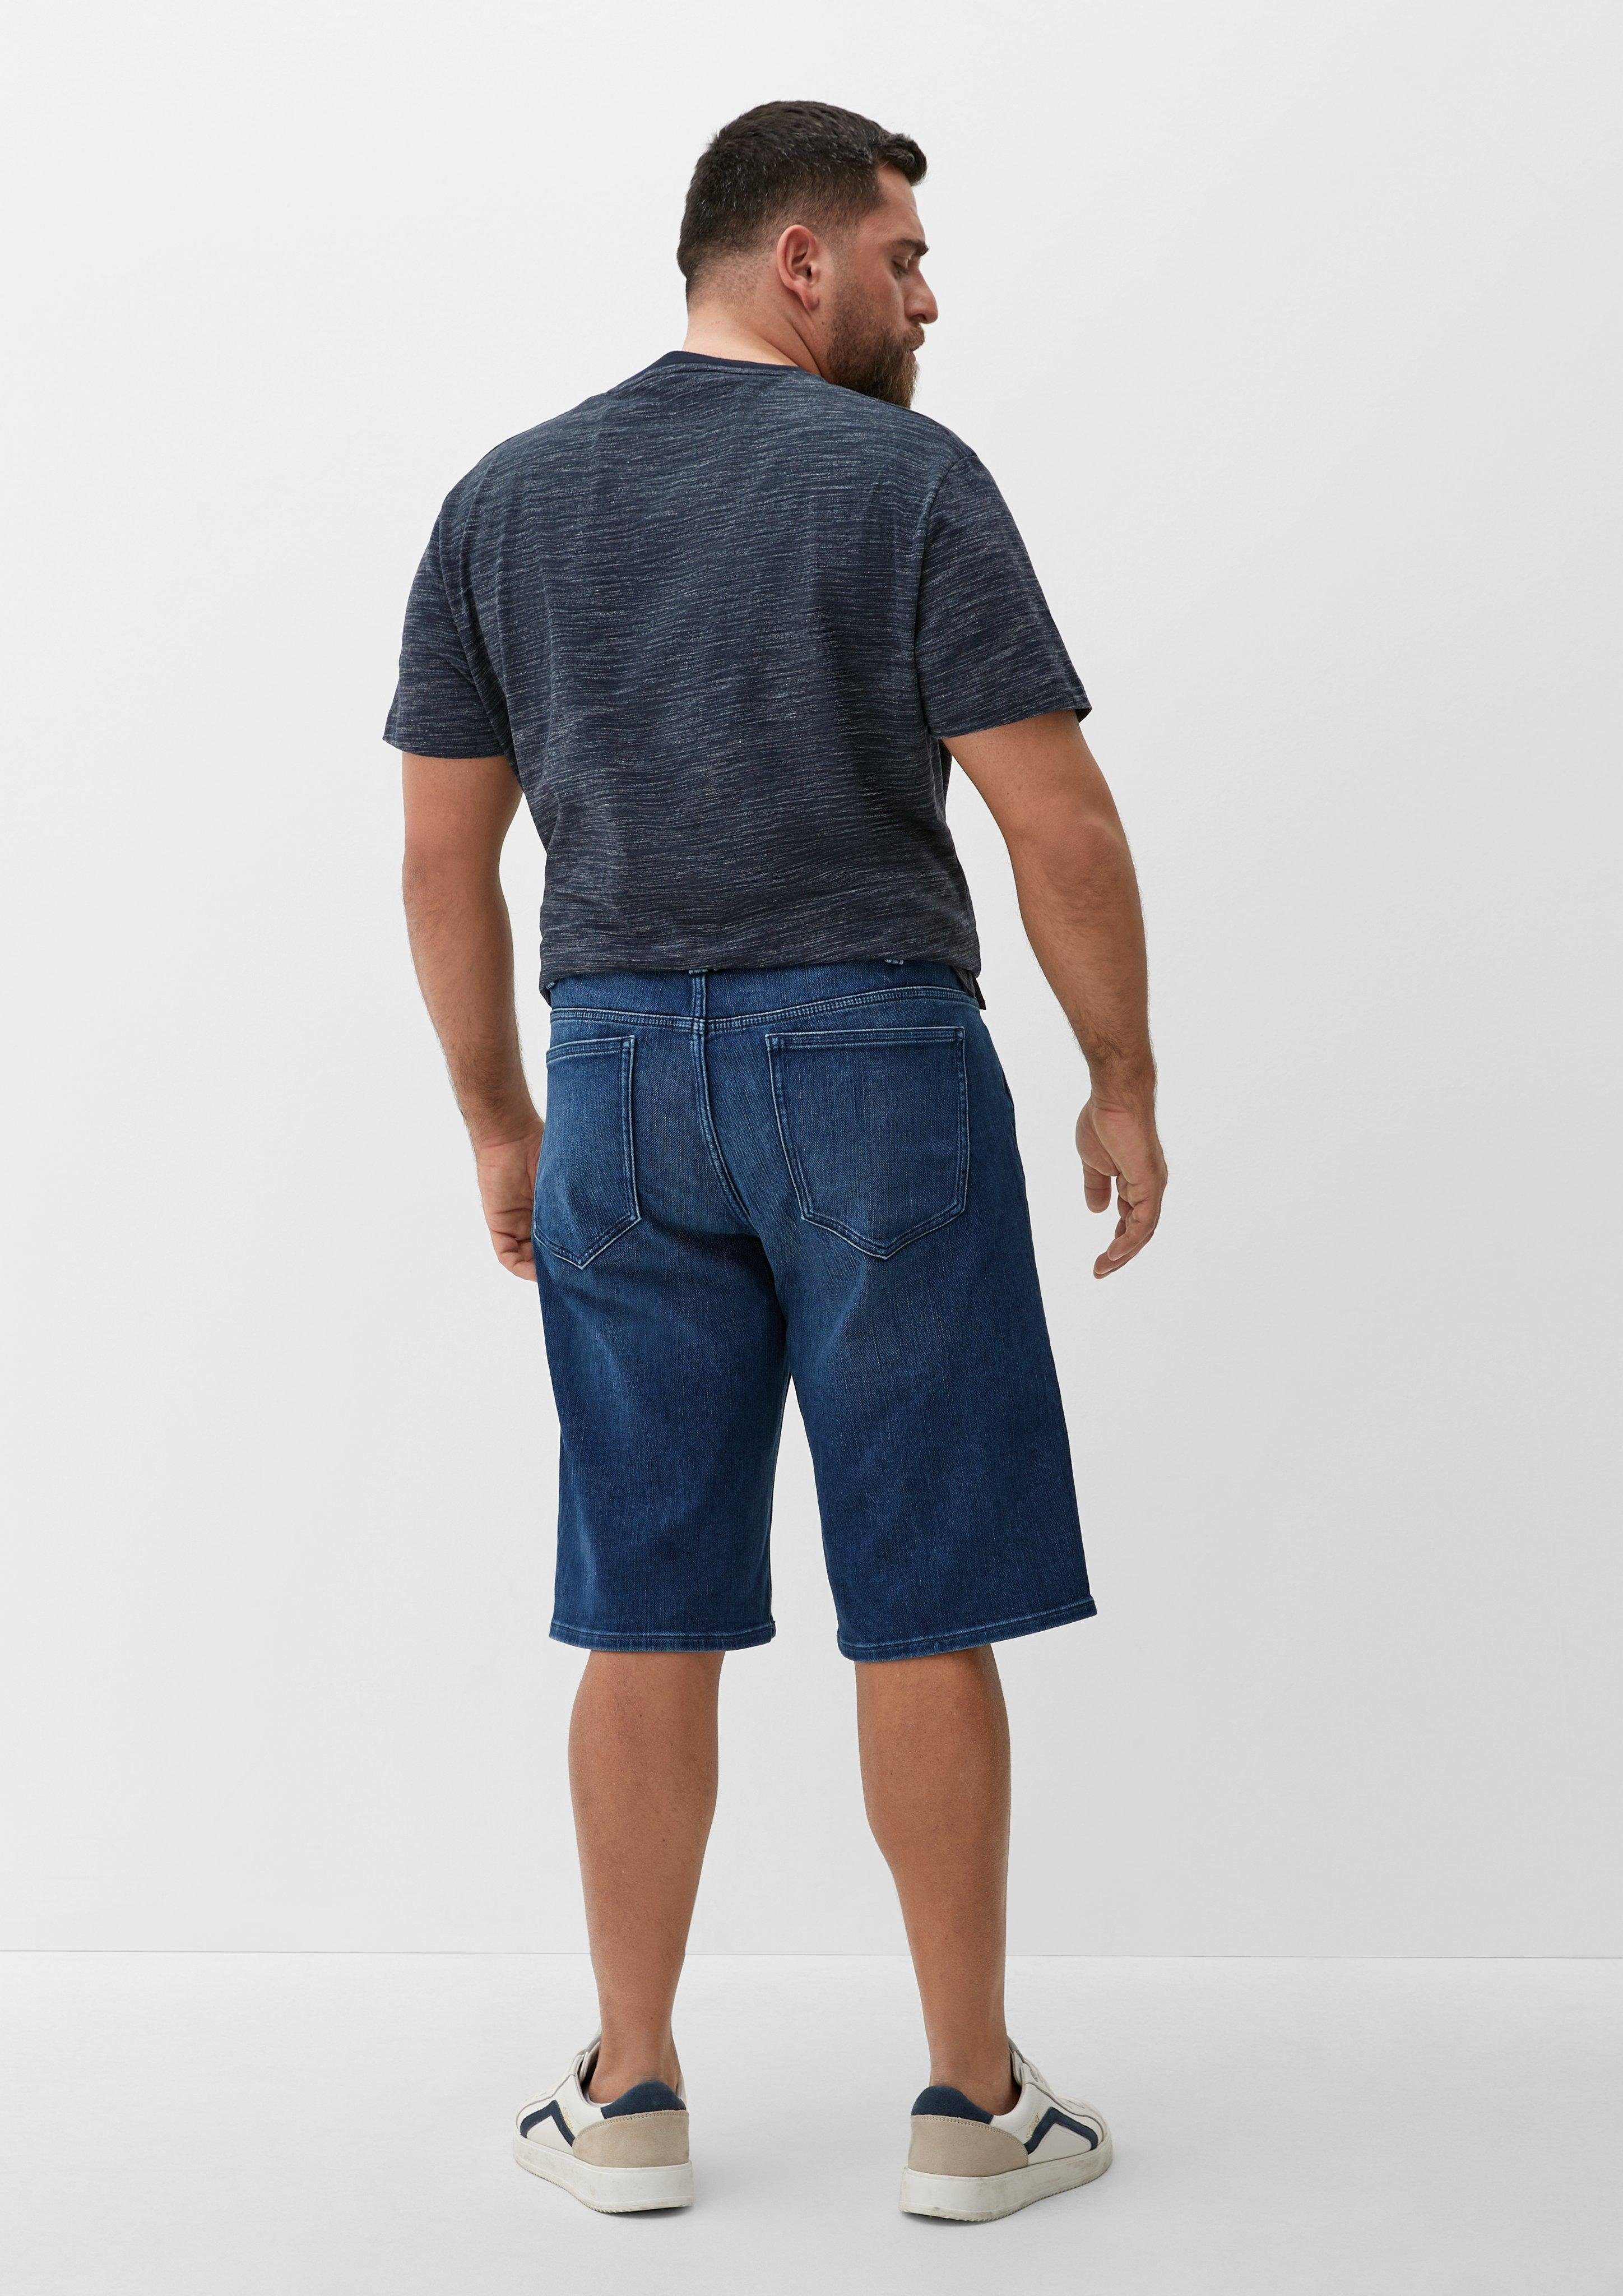 s.Oliver Jeansshorts / Leg Casby Straight / Relaxed Mid Fit / tiefblau Rise Jeans-Shorts